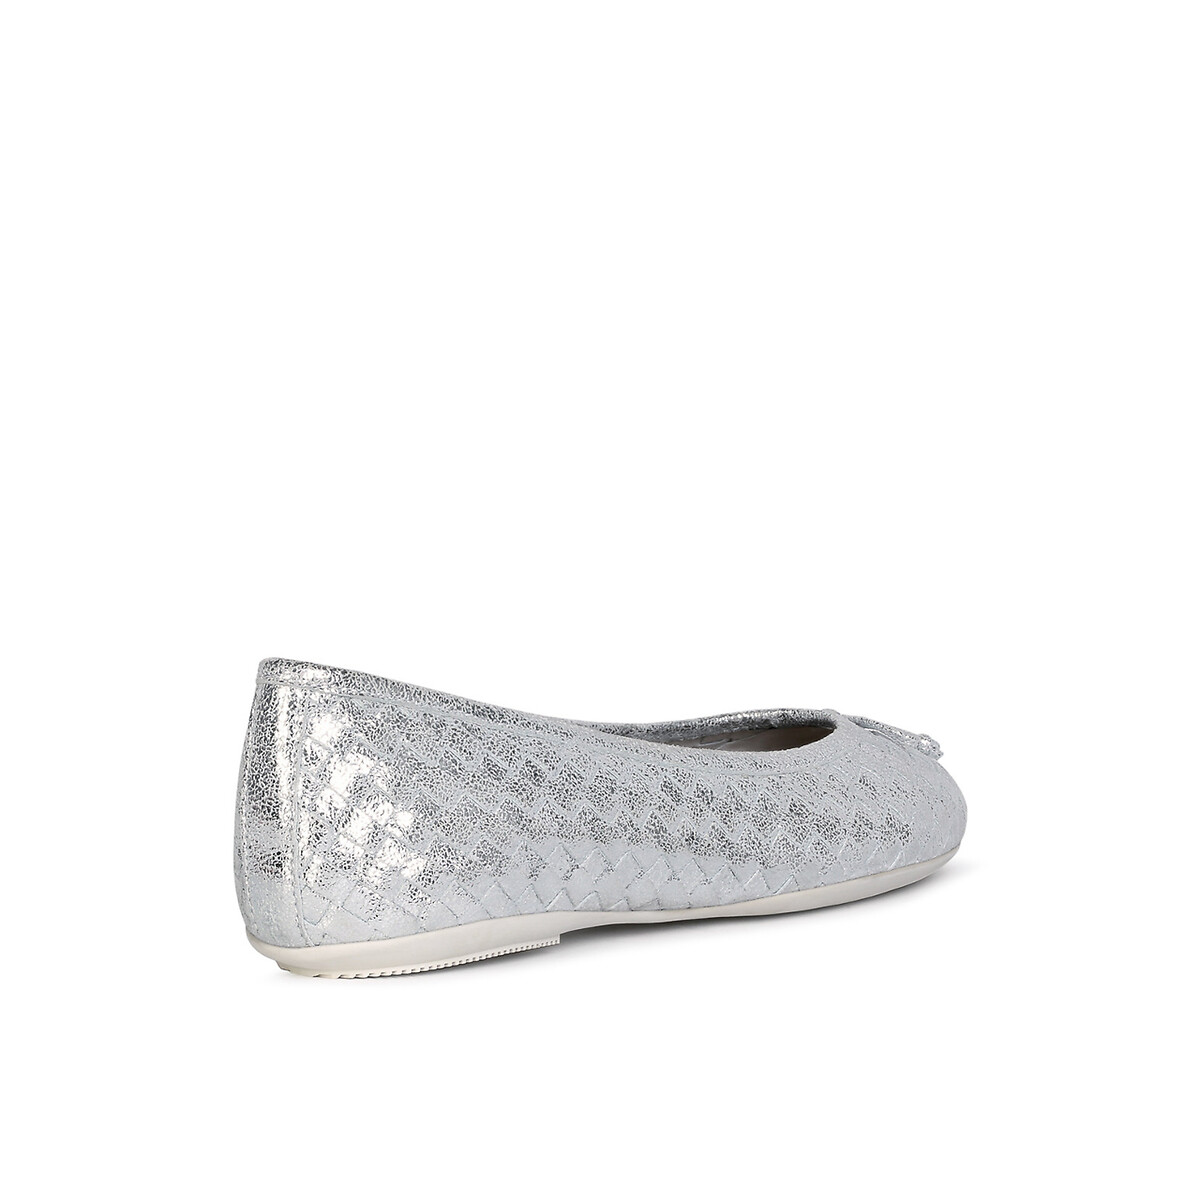 Palmaria braided leather ballet flats silver-coloured Geox | La Redoute